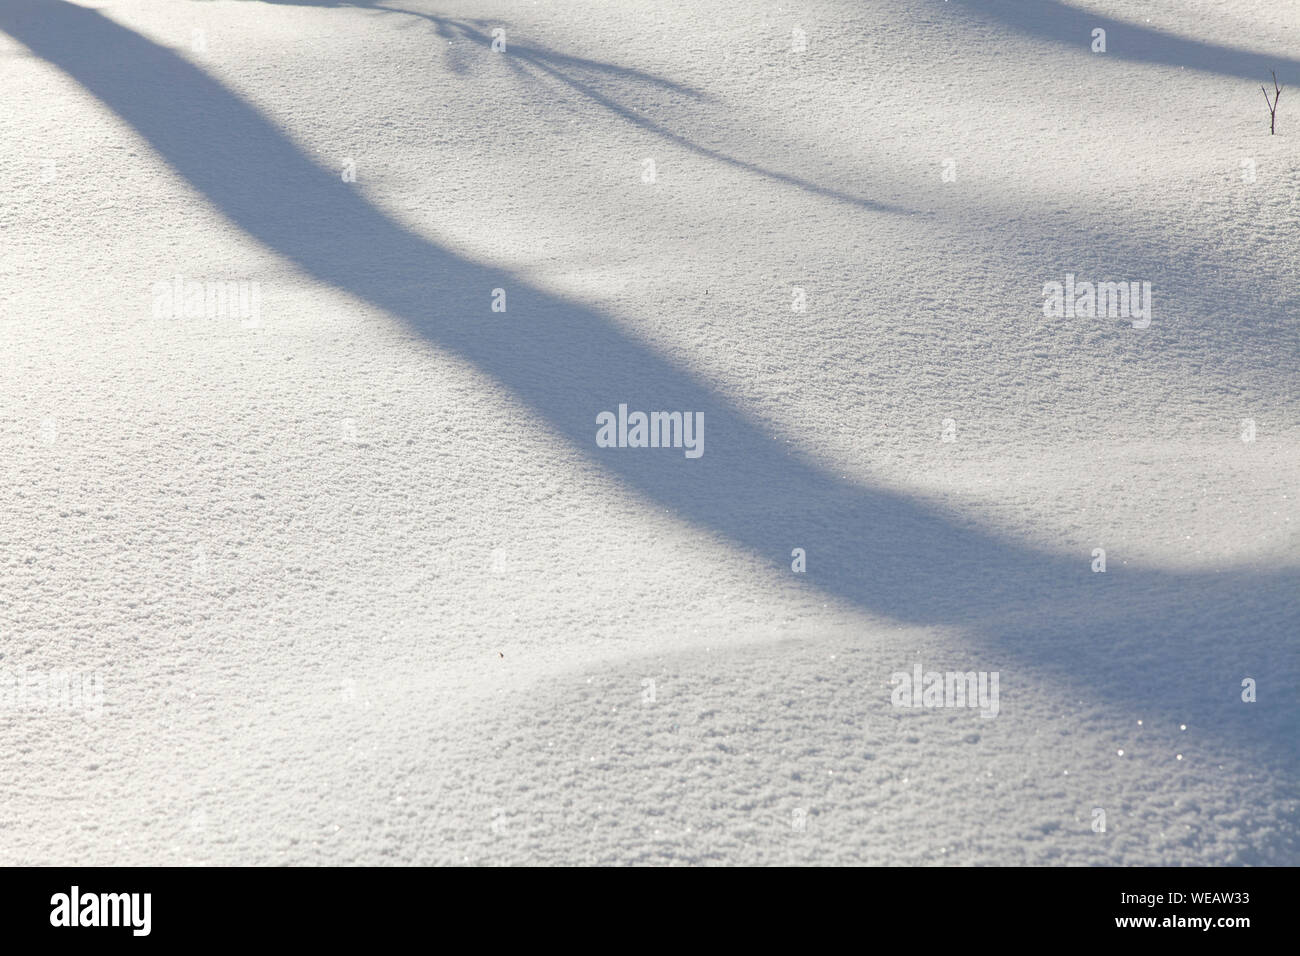 snow texture with ligthbeams and shadows, white background Stock Photo